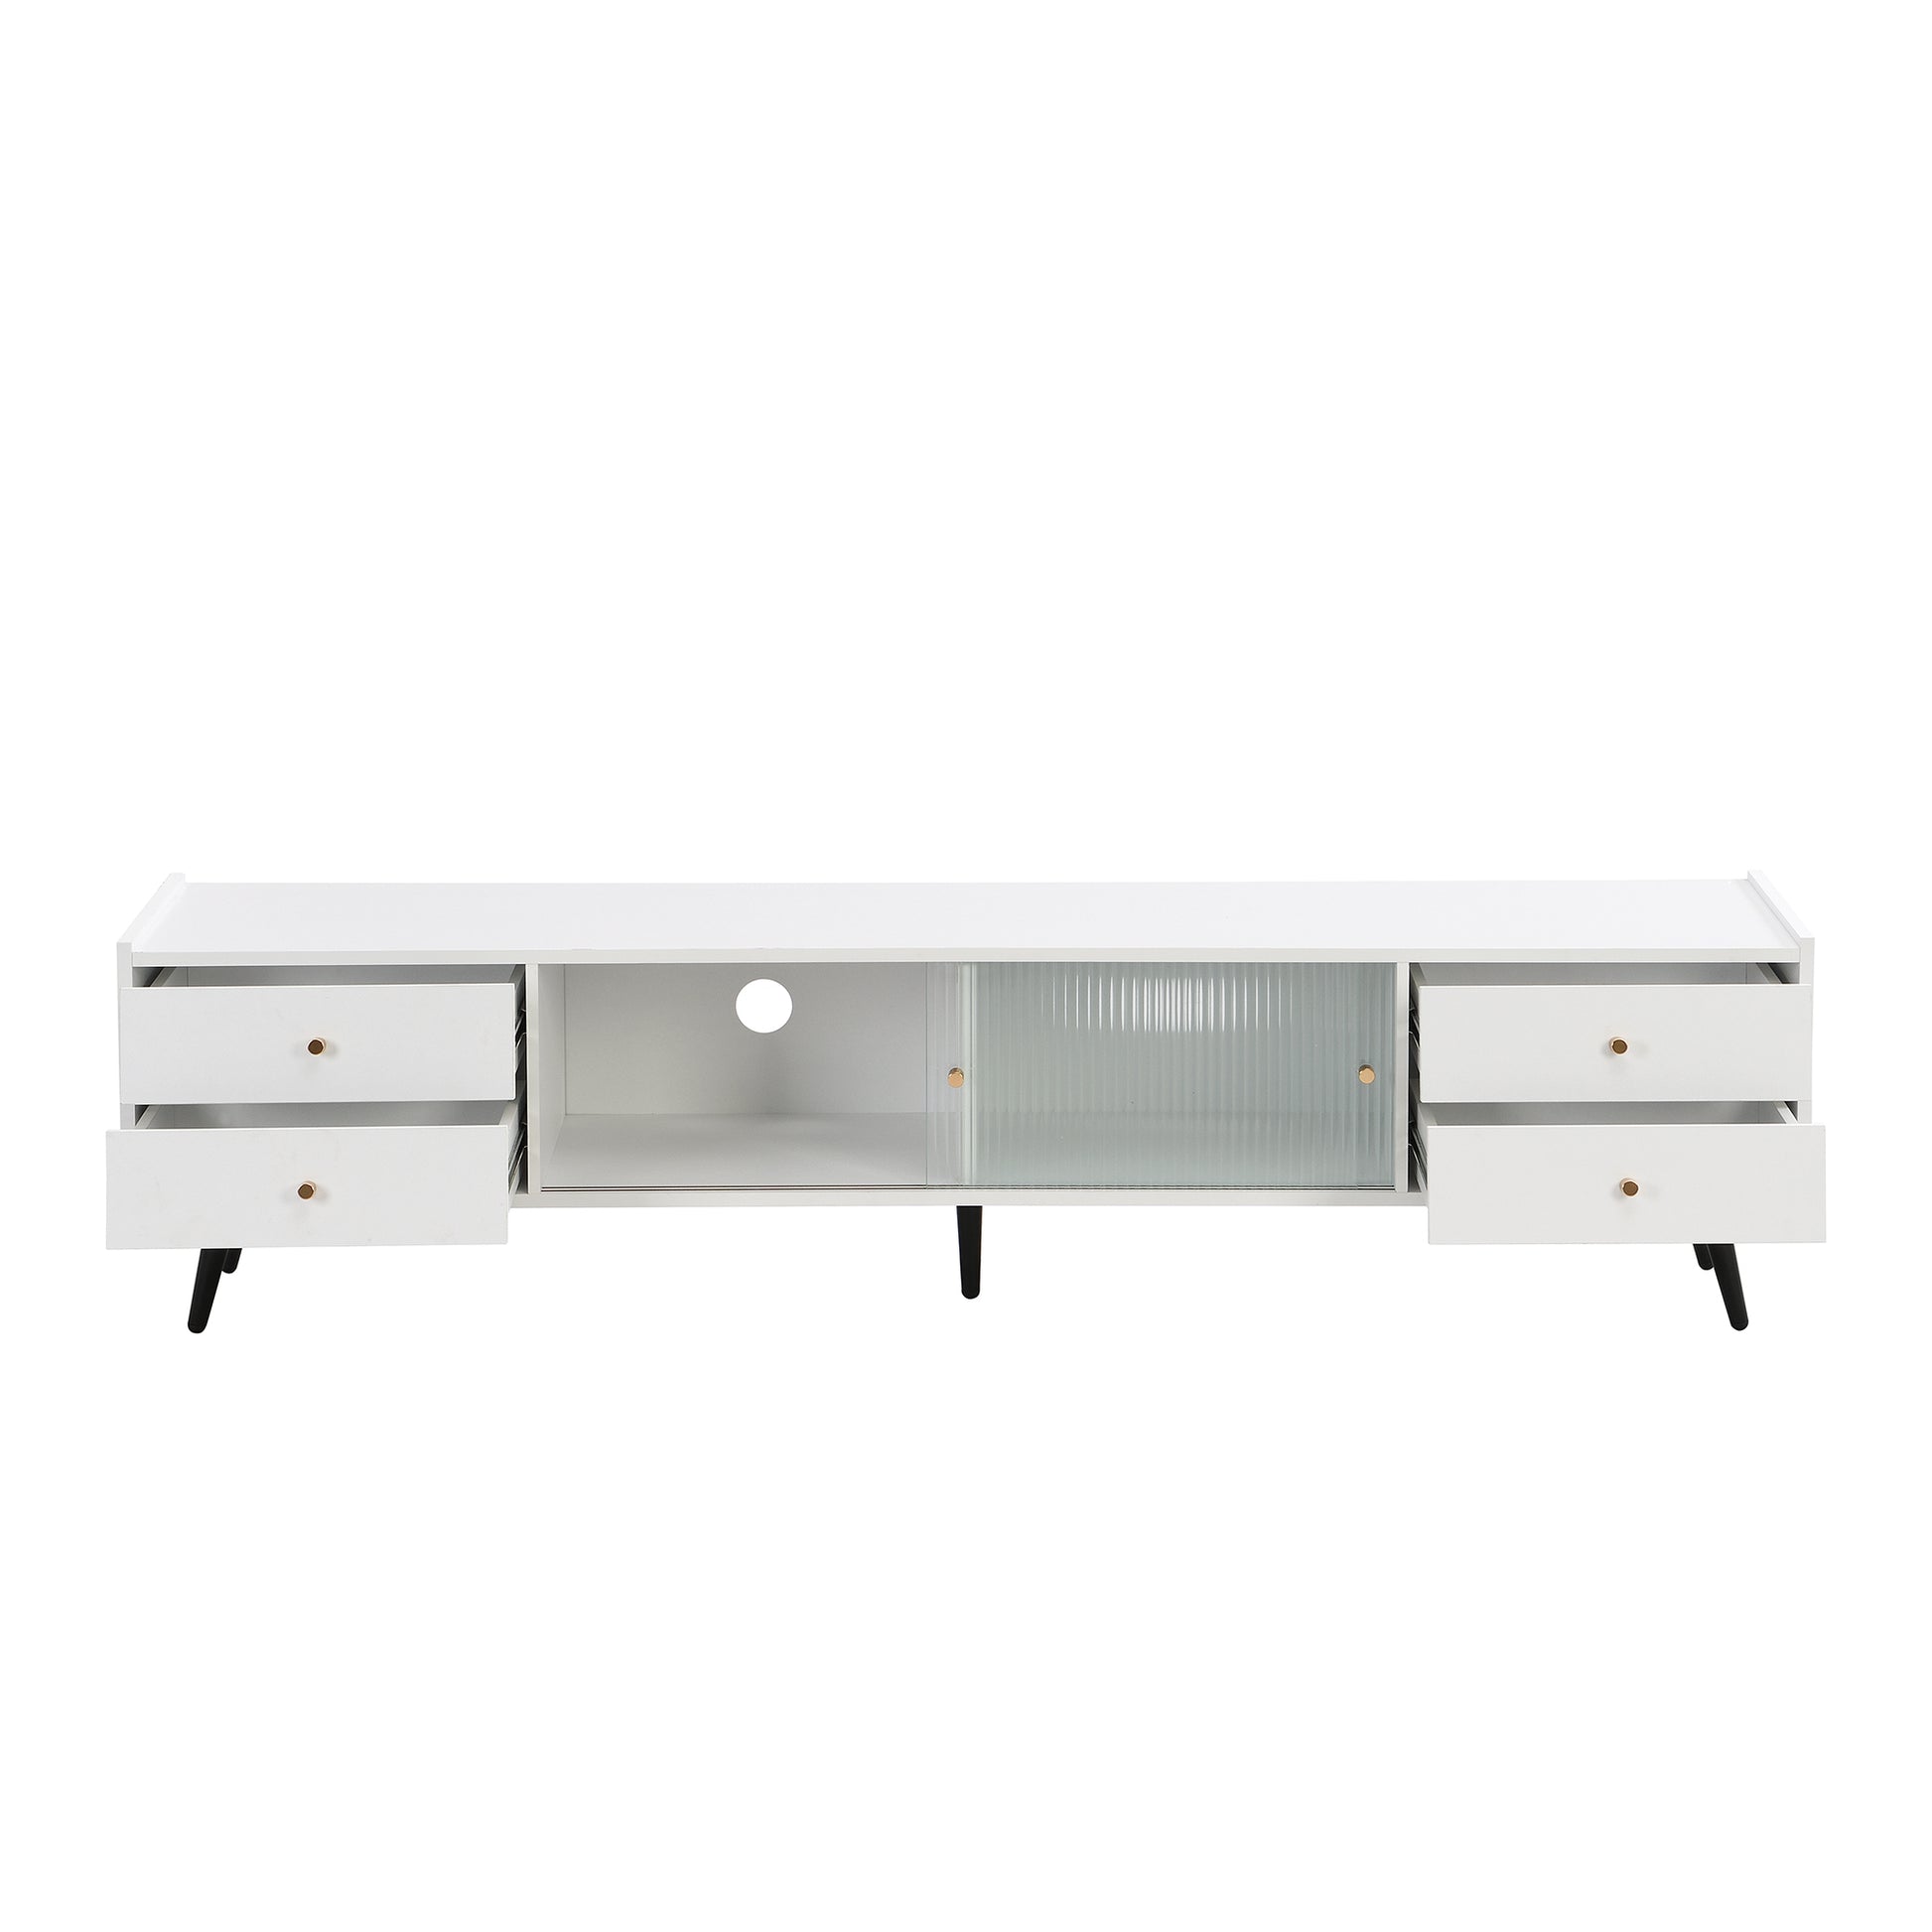 ON-TREND Contemporary TV Stand with Sliding Fluted Glass Doors, Slanted Drawers Media Console for TVs Up to 70", Chic Elegant TV Cabinet with Golden Metal Handles , White - Enova Luxe Home Store